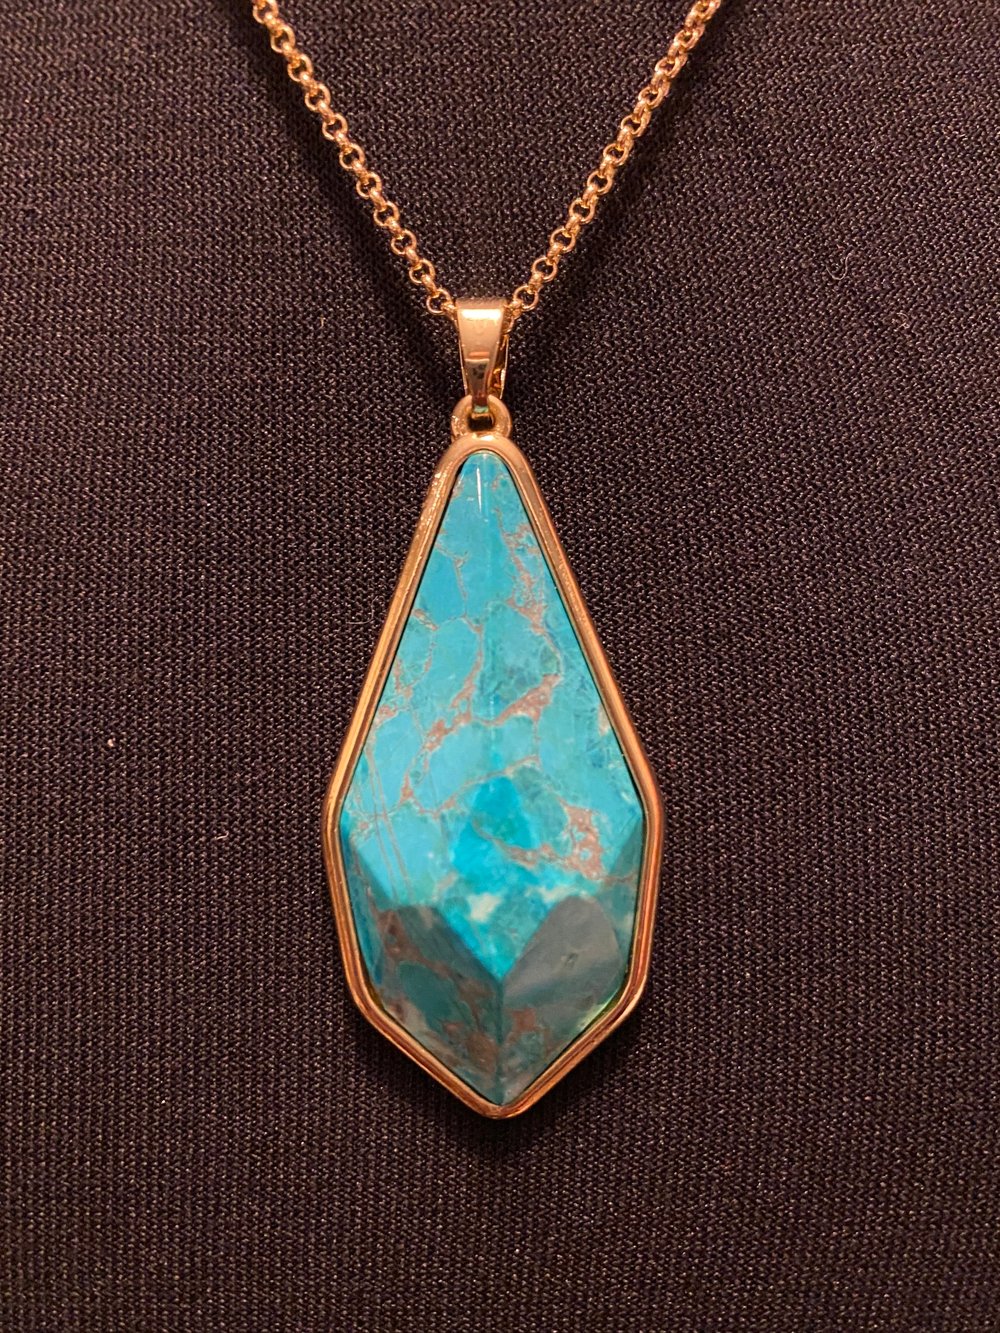 Turquoise Teardrop Pendant with Gold Chain Necklace